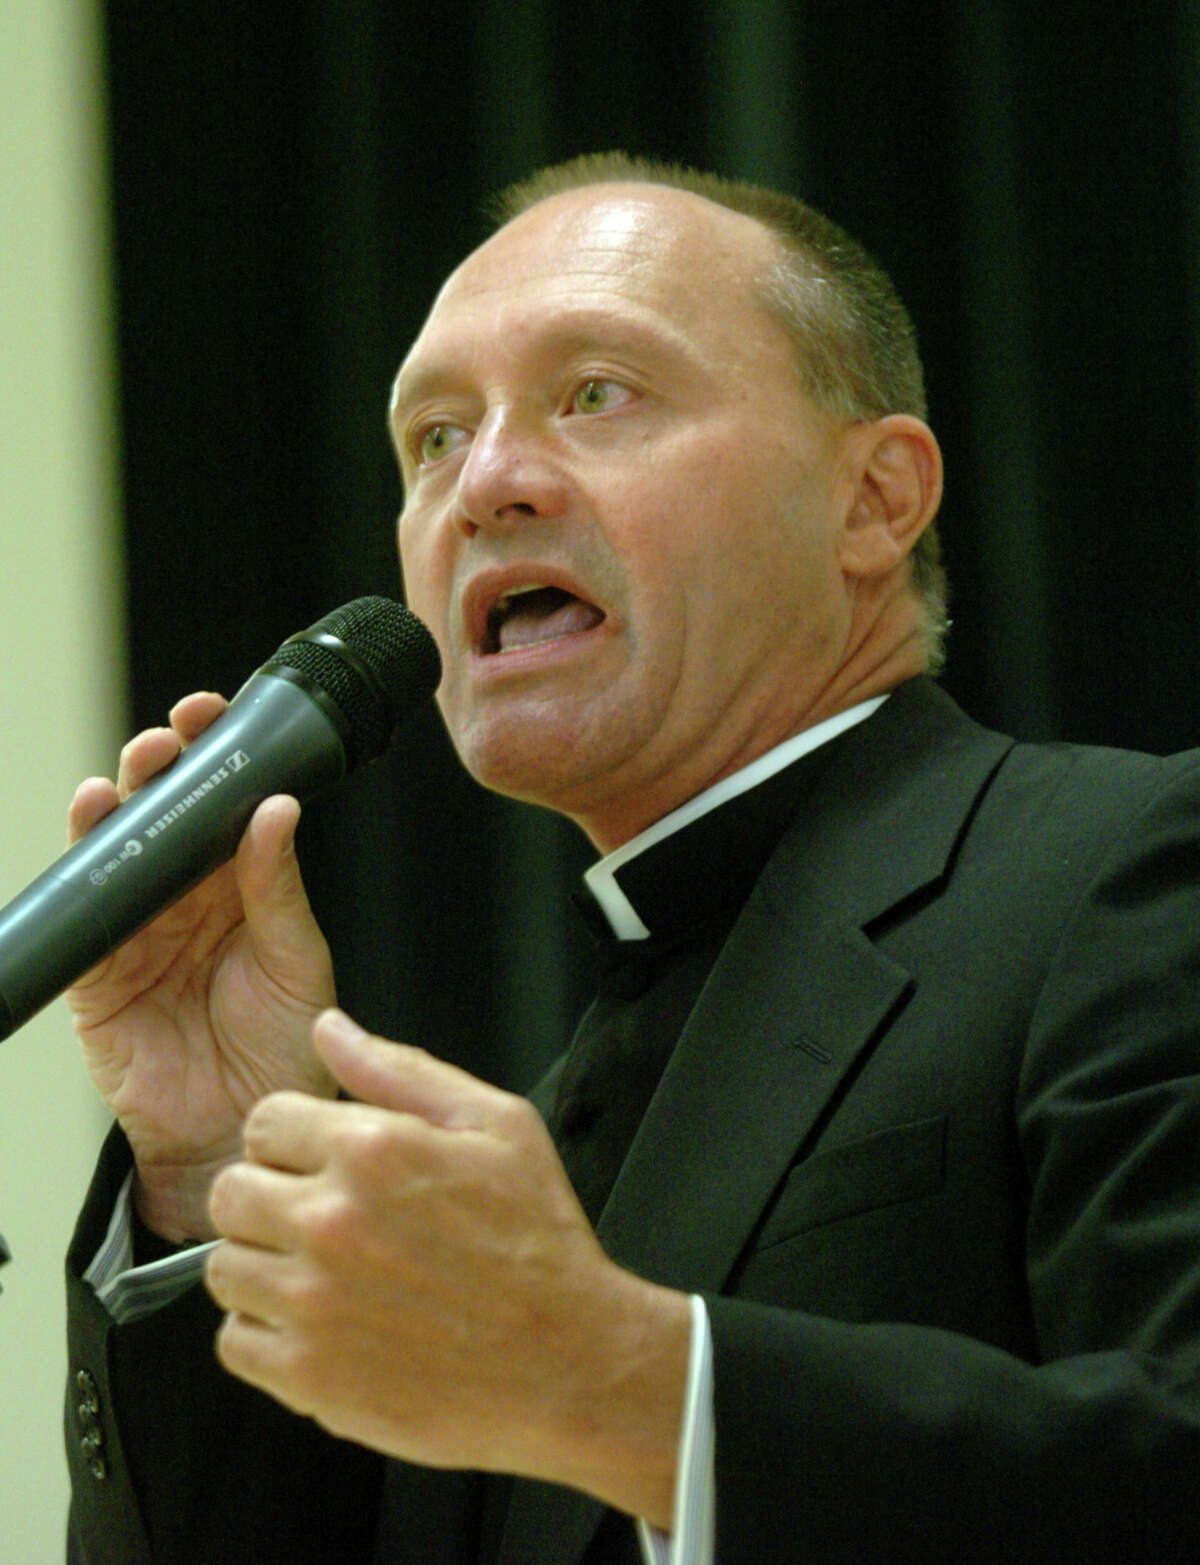 Monsignor Kevin Wallin addresses the faithful at a packed house at the Catholic Center on Jewett Avenue in Bridgeport, May 4, 2006.